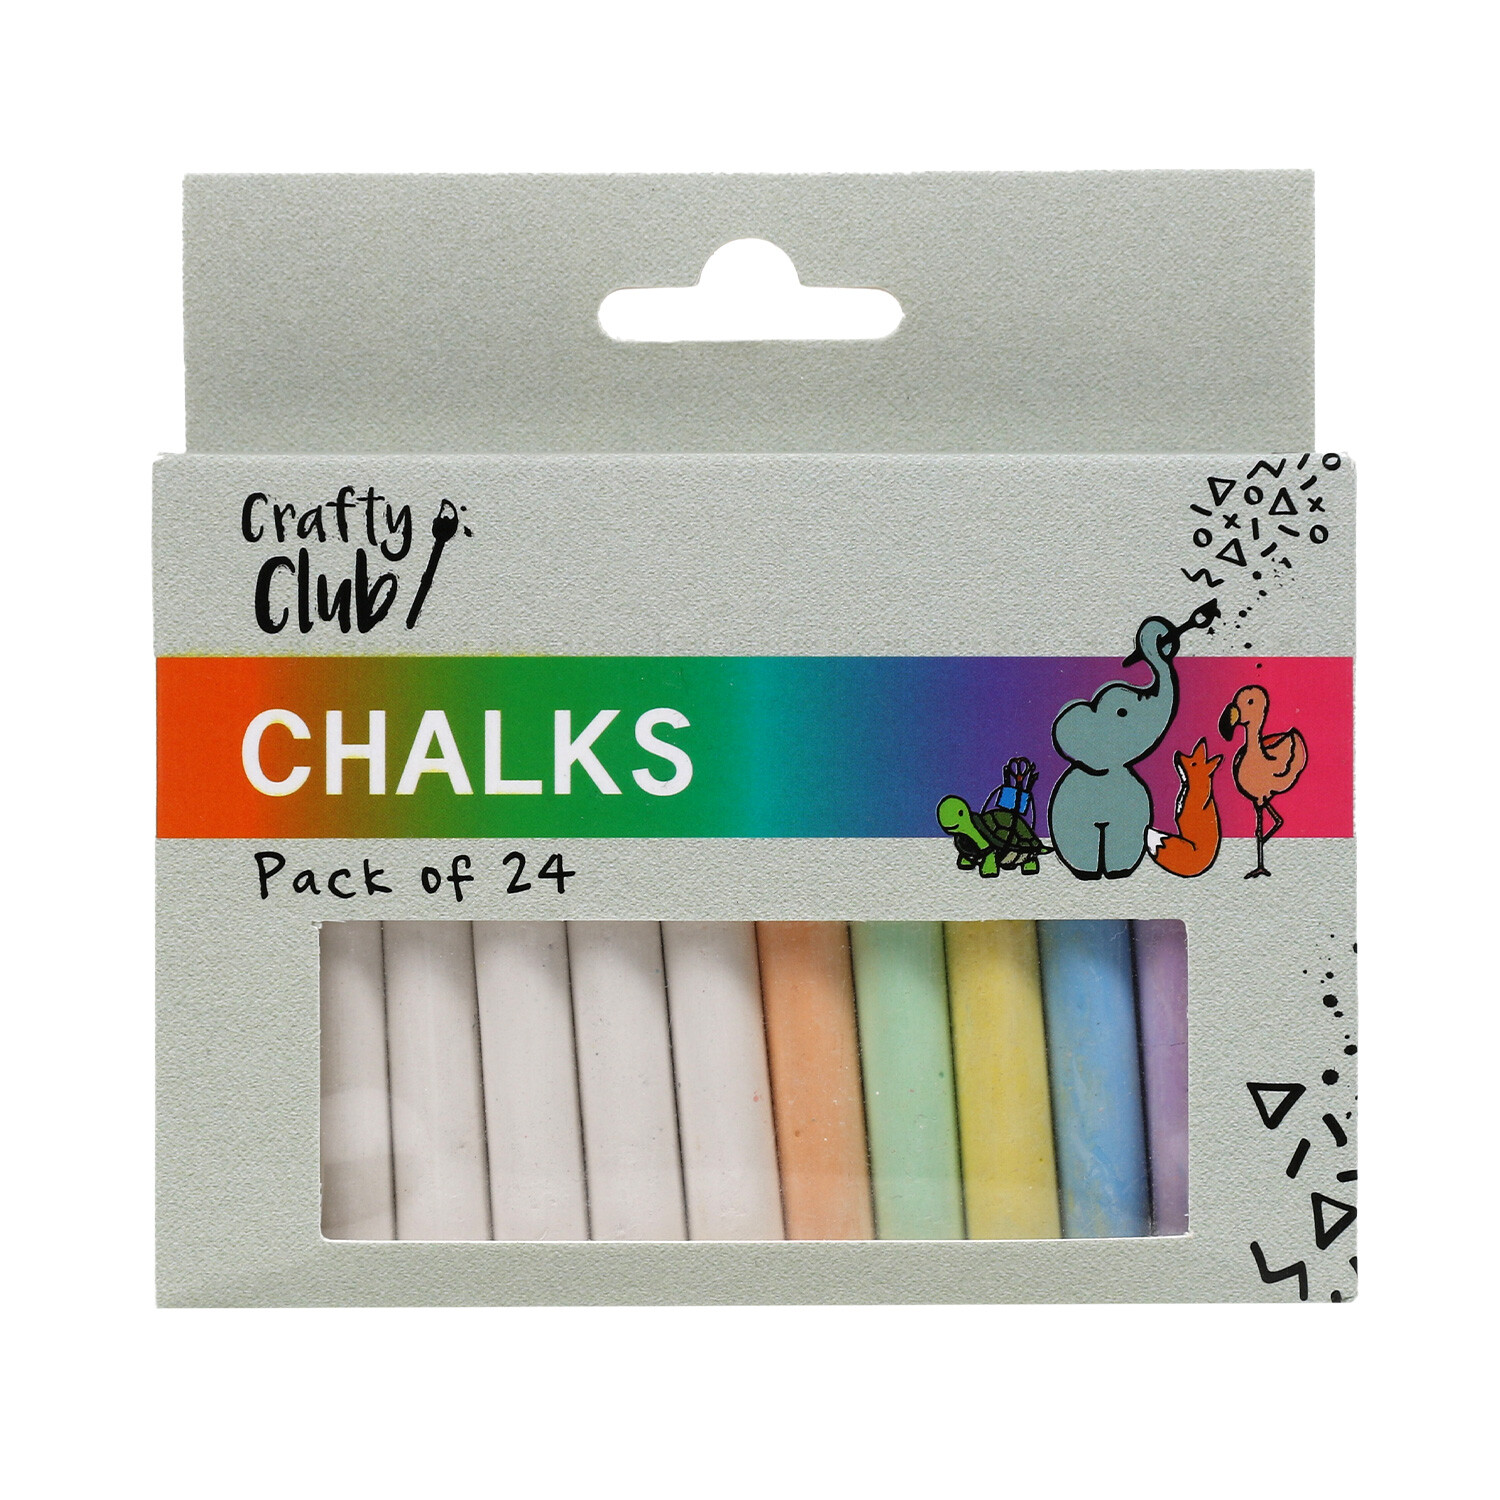 Crafty Club Pack of 24 Chalks Image